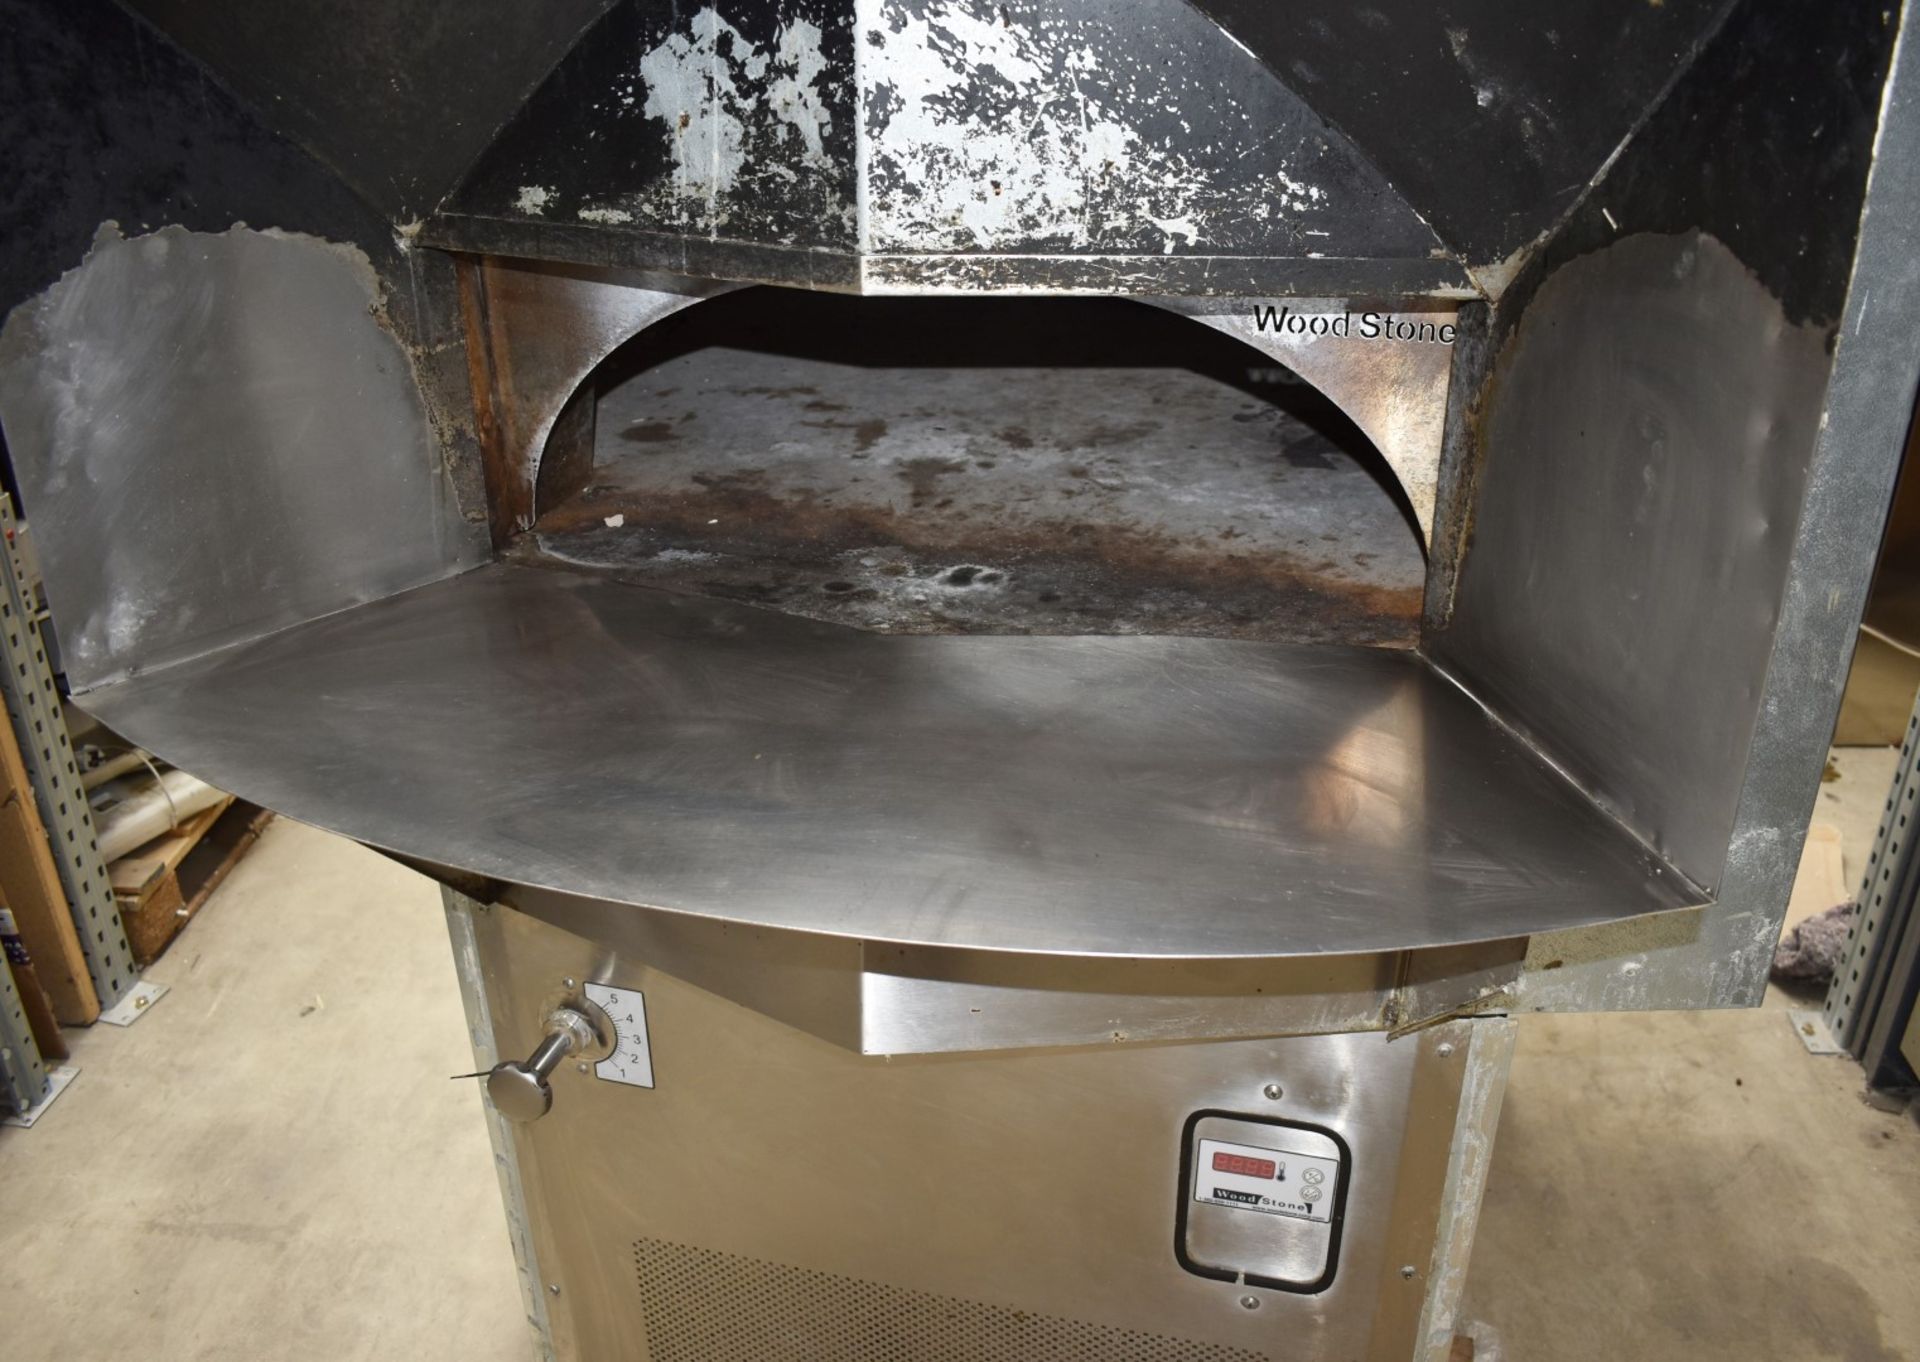 1 x Woodstone Mountain Series Commercial Gas Fired Pizza Oven - Approx RRP £25,000 - Image 23 of 25